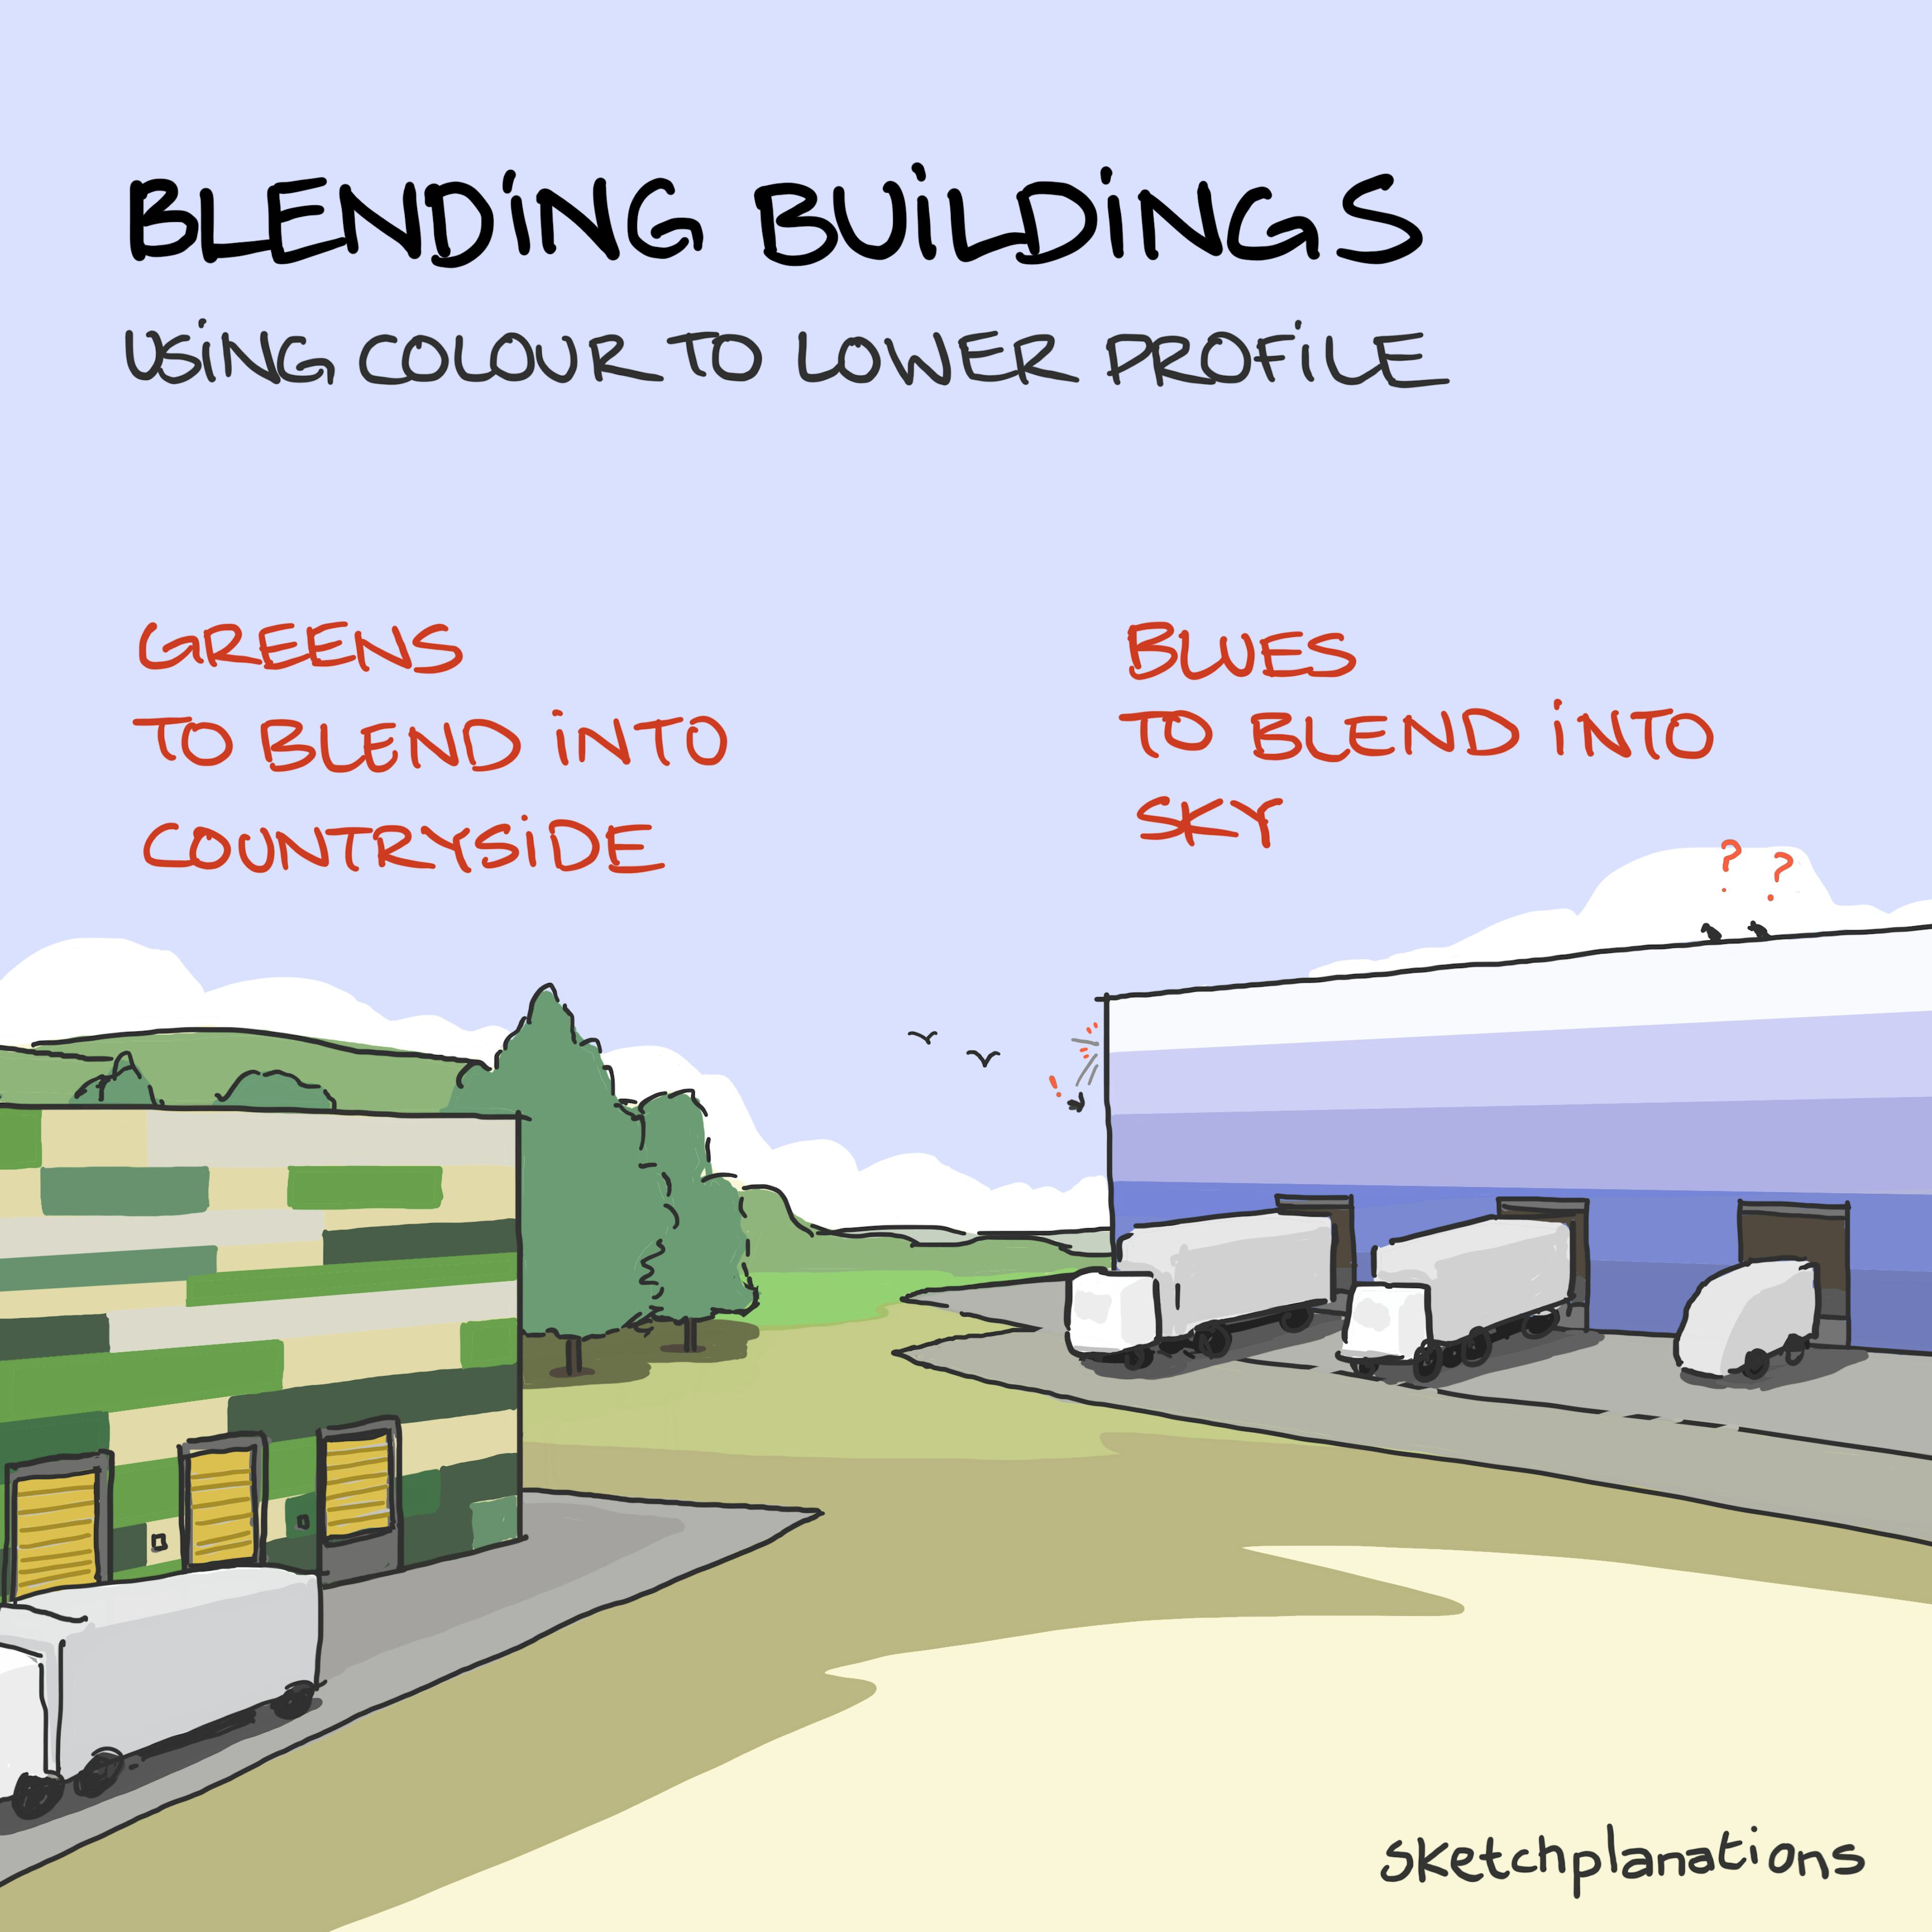 Blending buildings illustratiion: example of two large distribution warehouses one coloured in greens to blend better into countryside, and one in shades of blue to blend better into the sky.